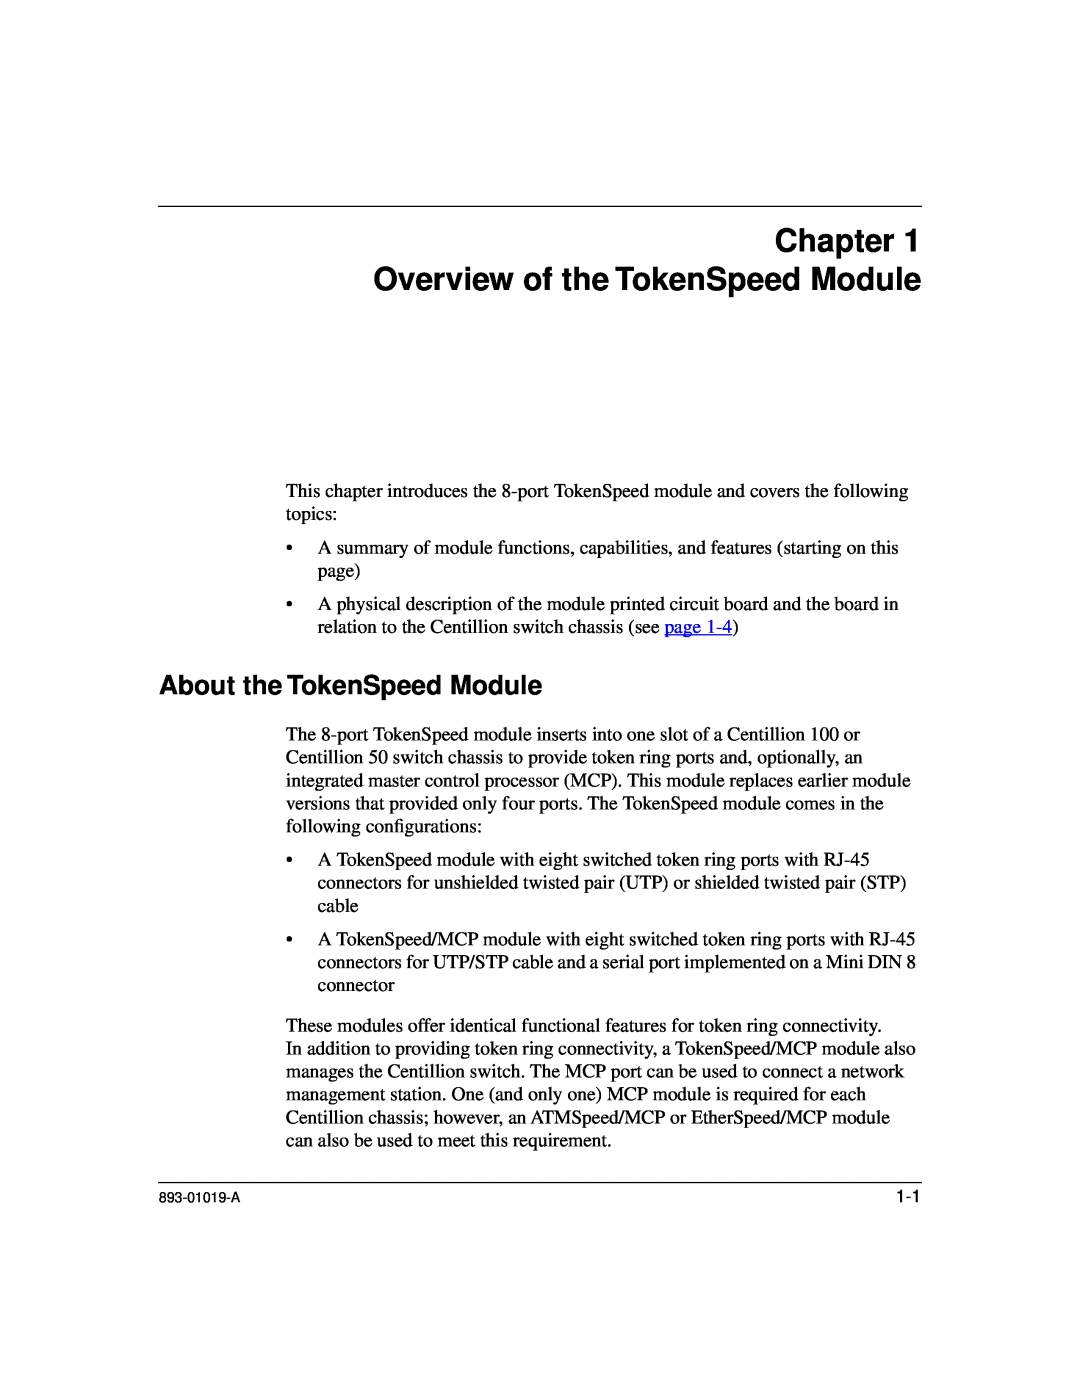 Nortel Networks 5000BH manual Chapter Overview of the TokenSpeed Module, About the TokenSpeed Module 